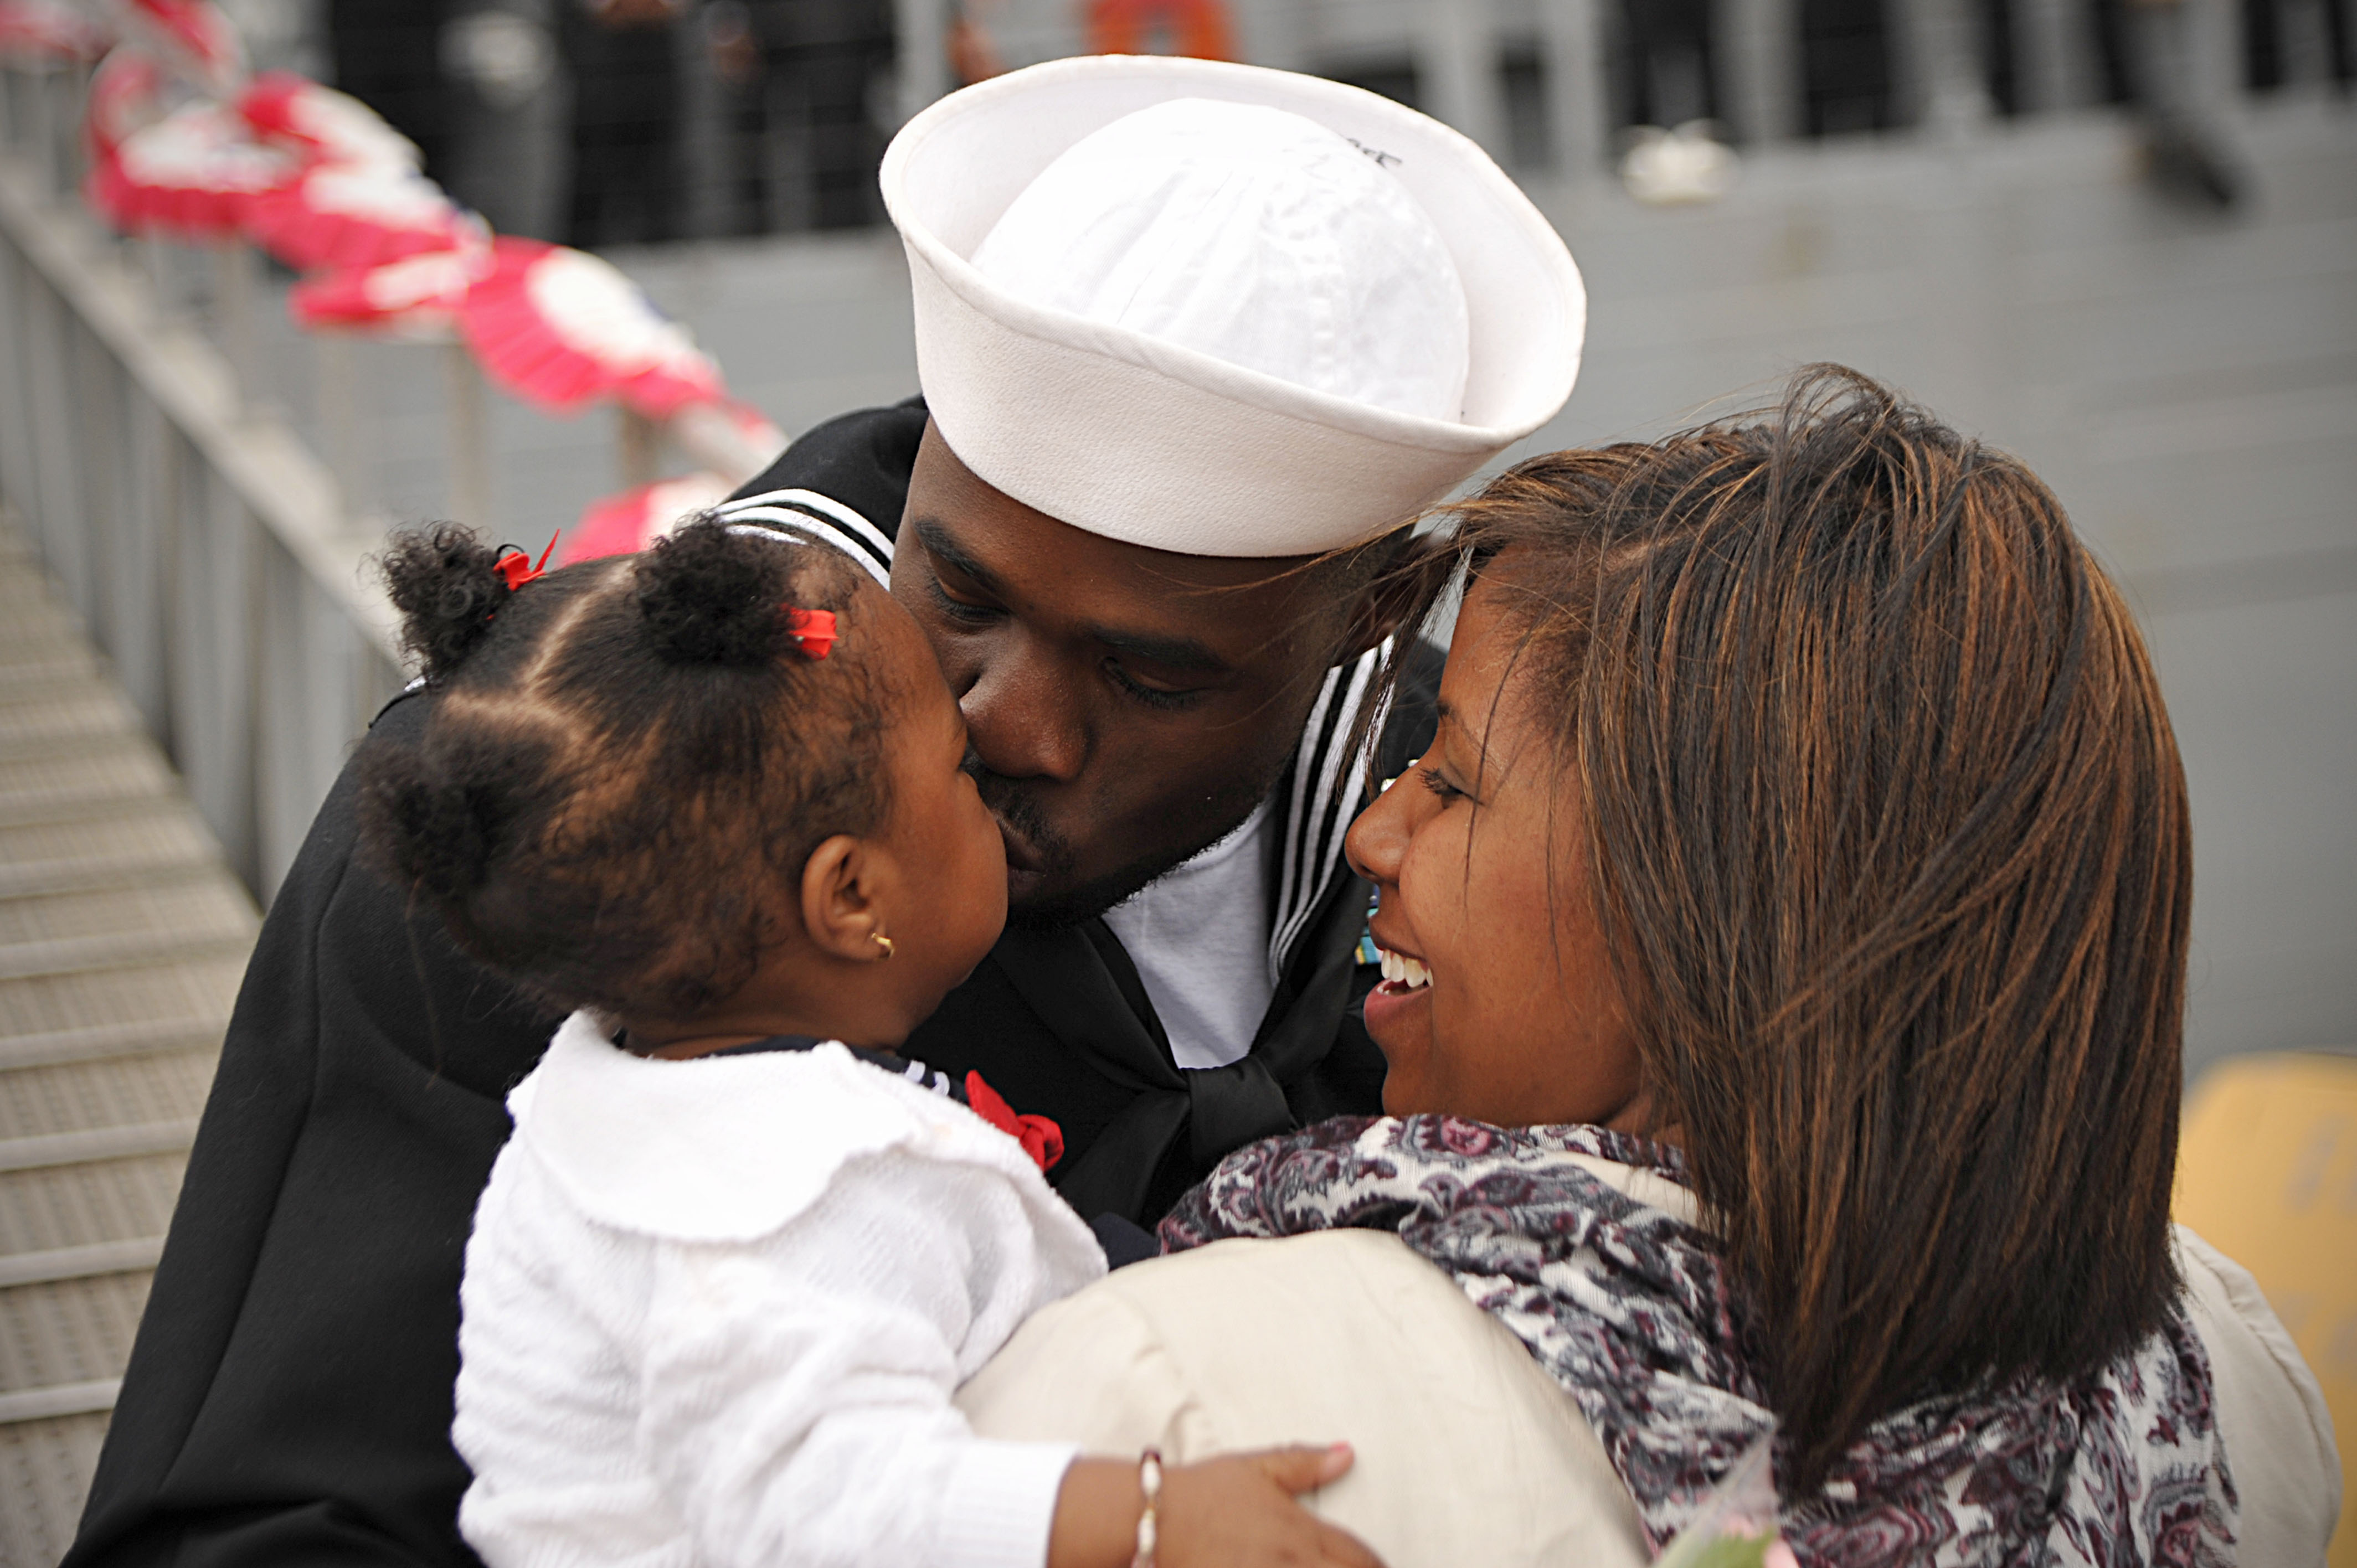 Boatswain's Mate 2nd Class Deshawn Byers kisses his daughter during a homecoming celebration for USS De Wert's (FFG-45). US Navy Photo